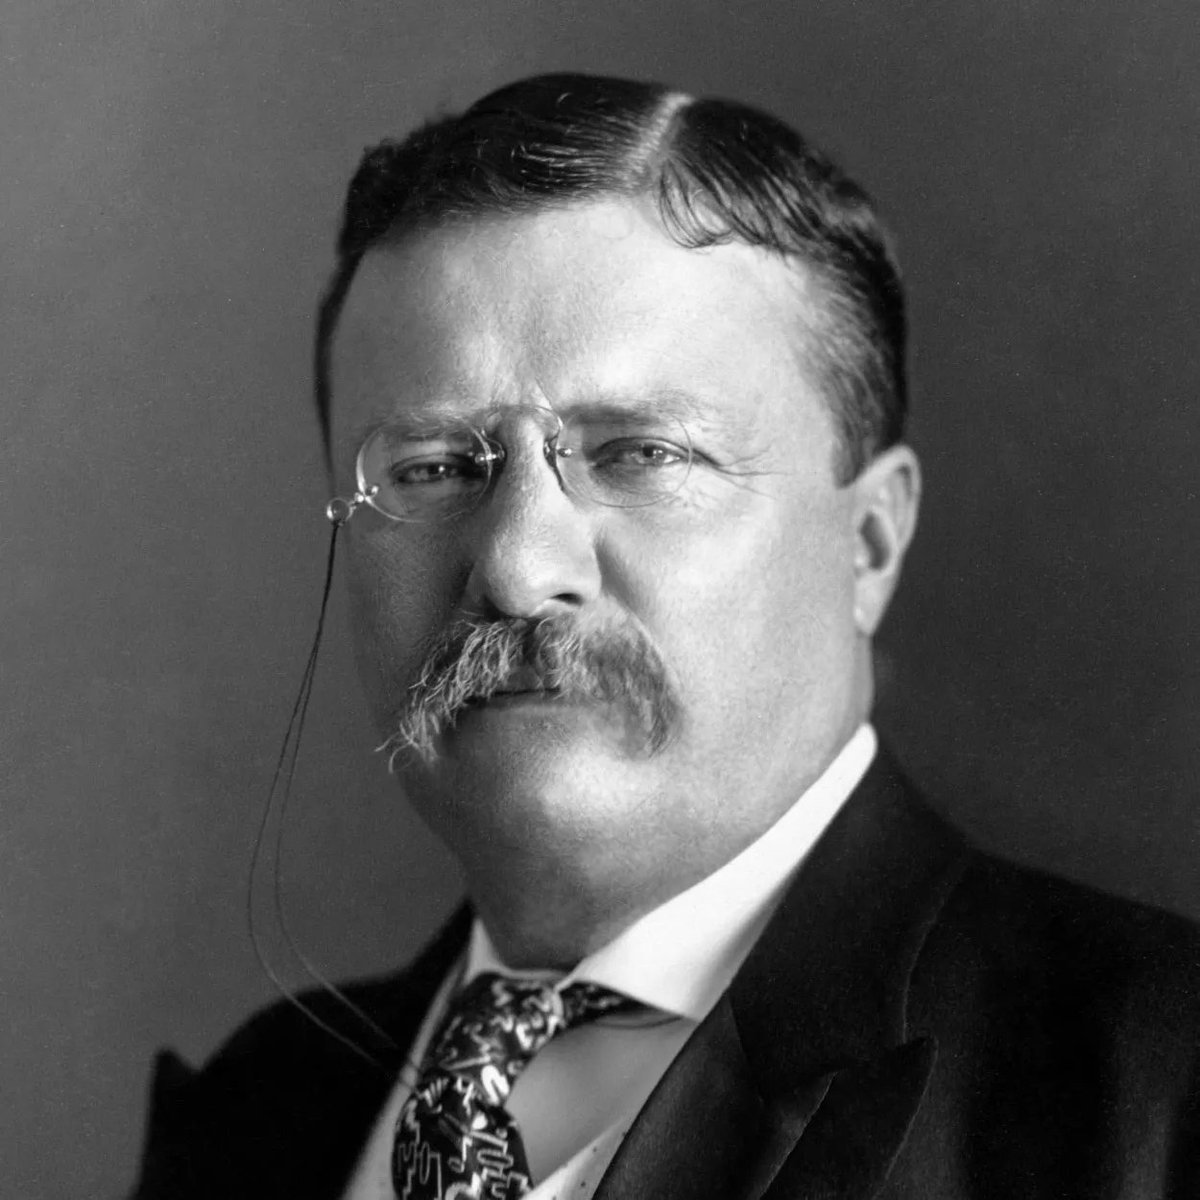 'Do what you can with all you have, wherever you are. '

- Theodore Roosevelt

#buildinpublic #SaaS #indiehackers